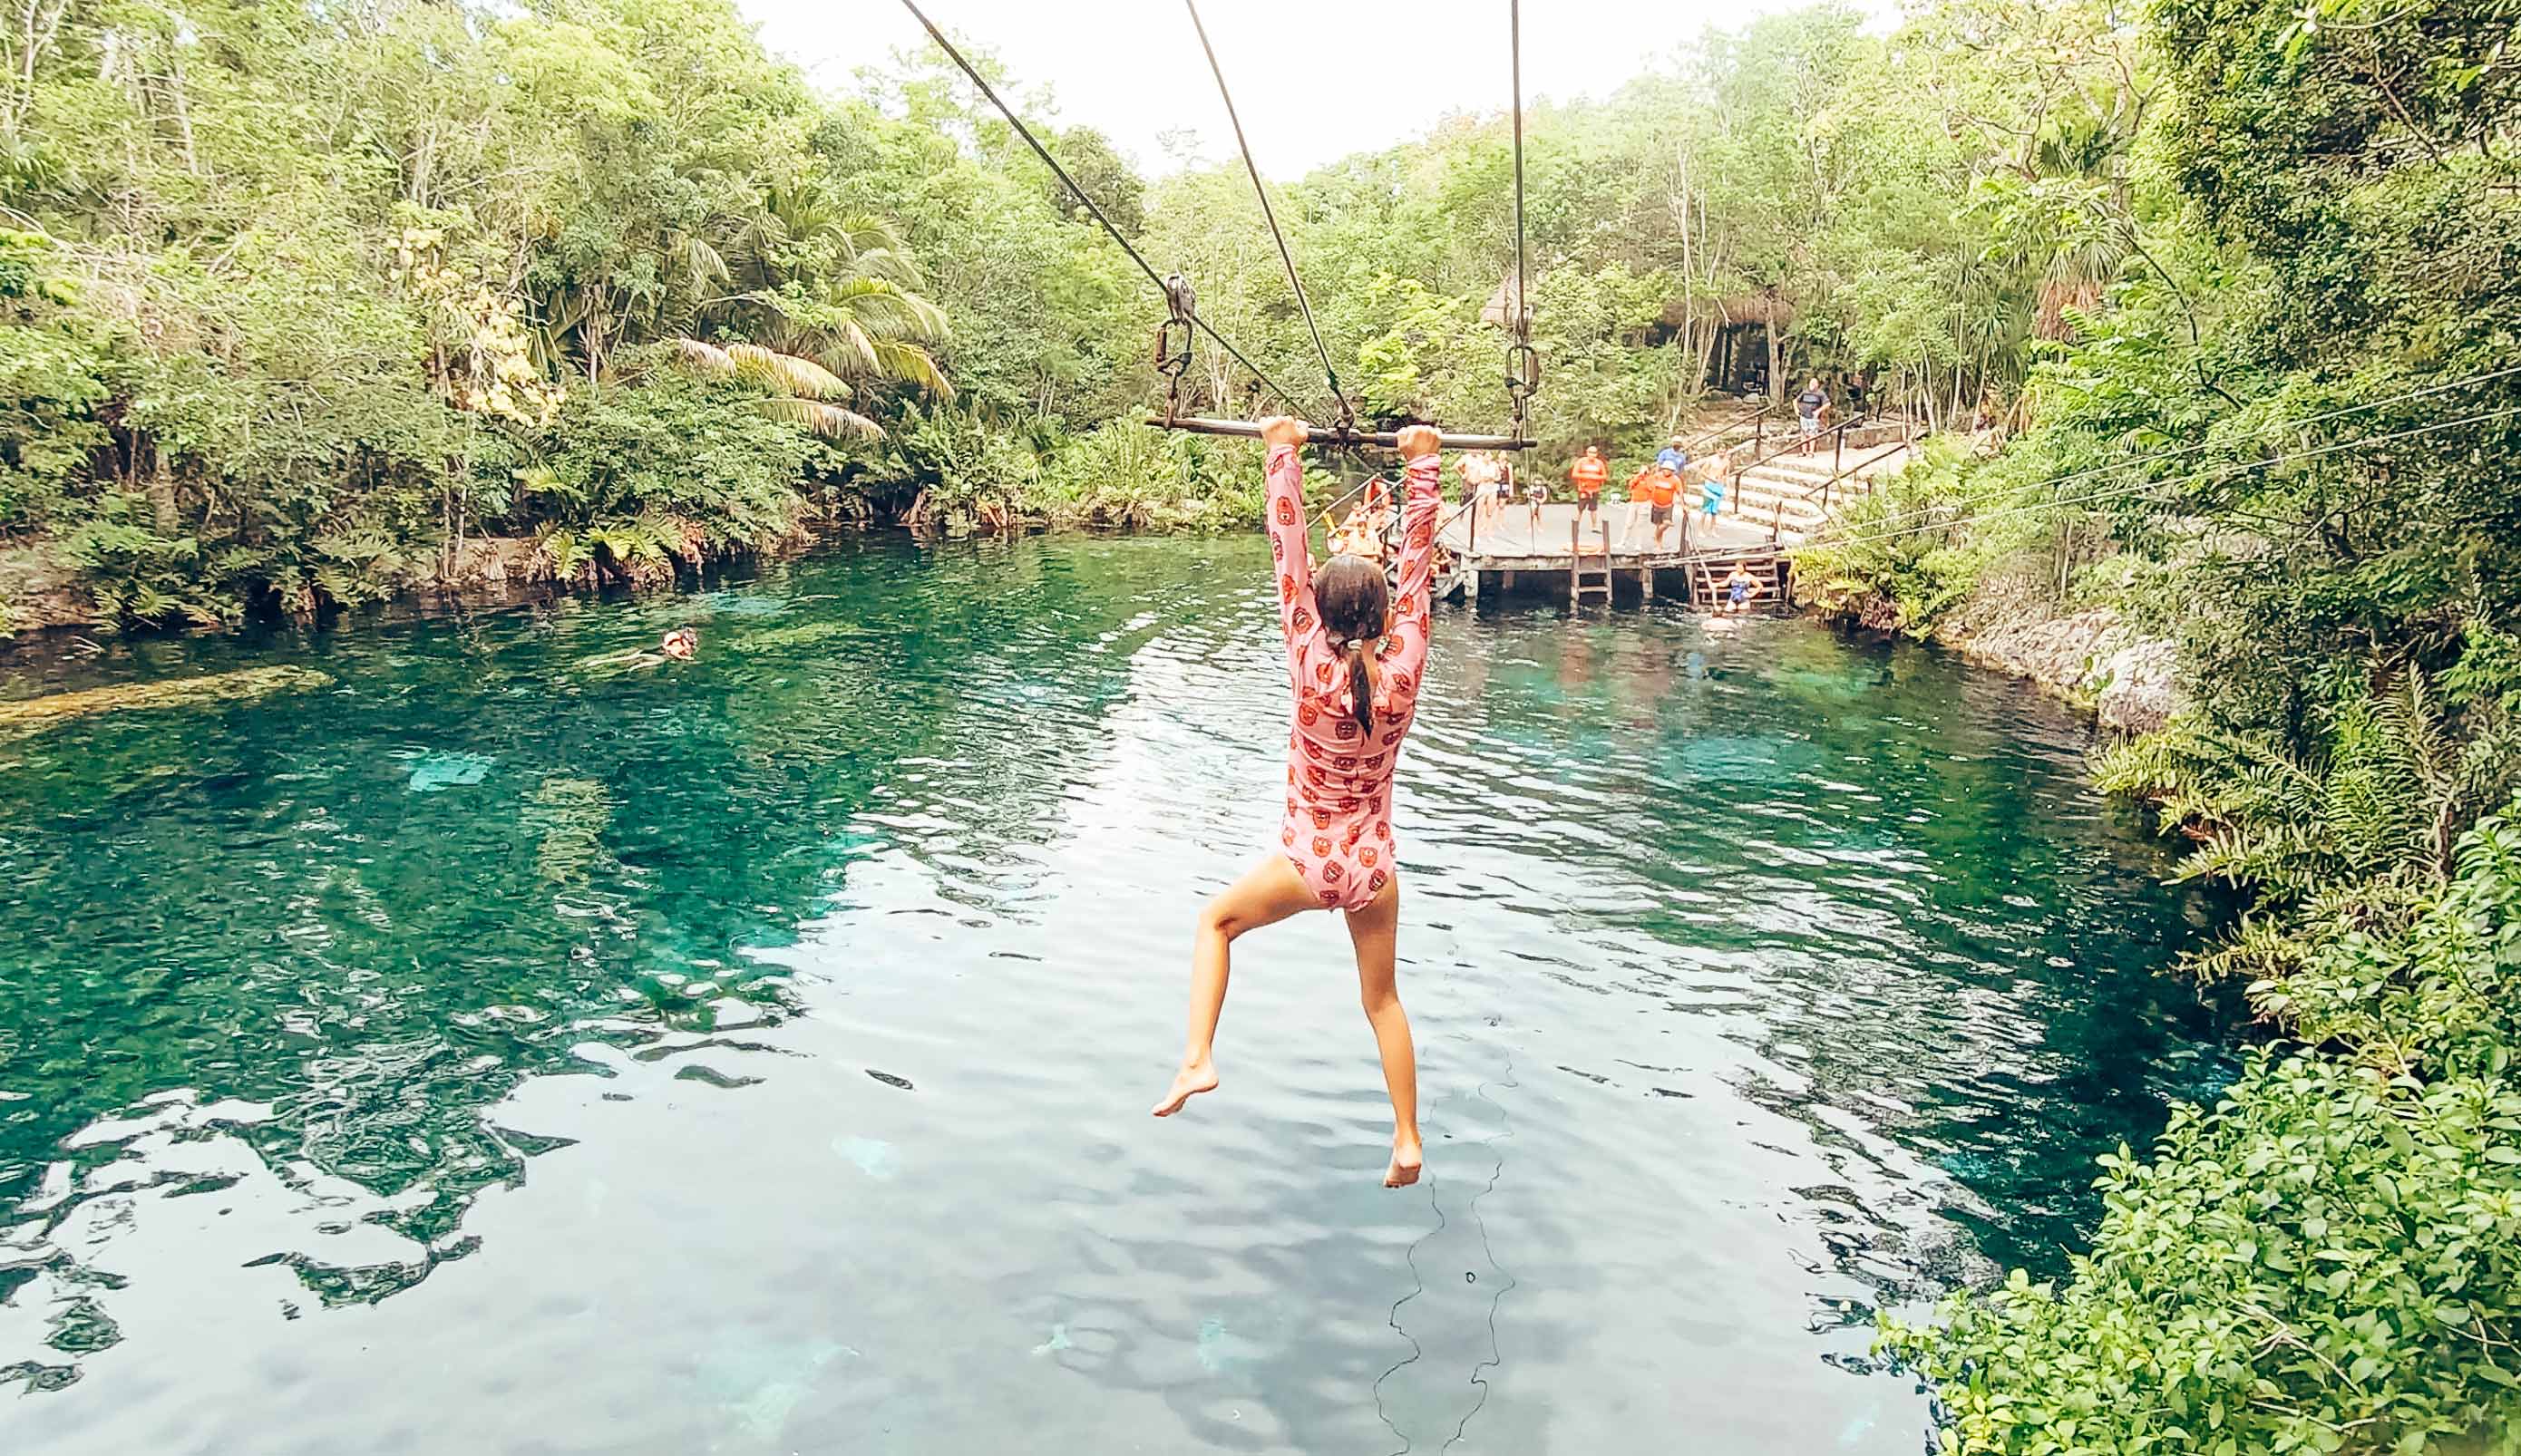 Young girl riding a zipline over water in Mexico